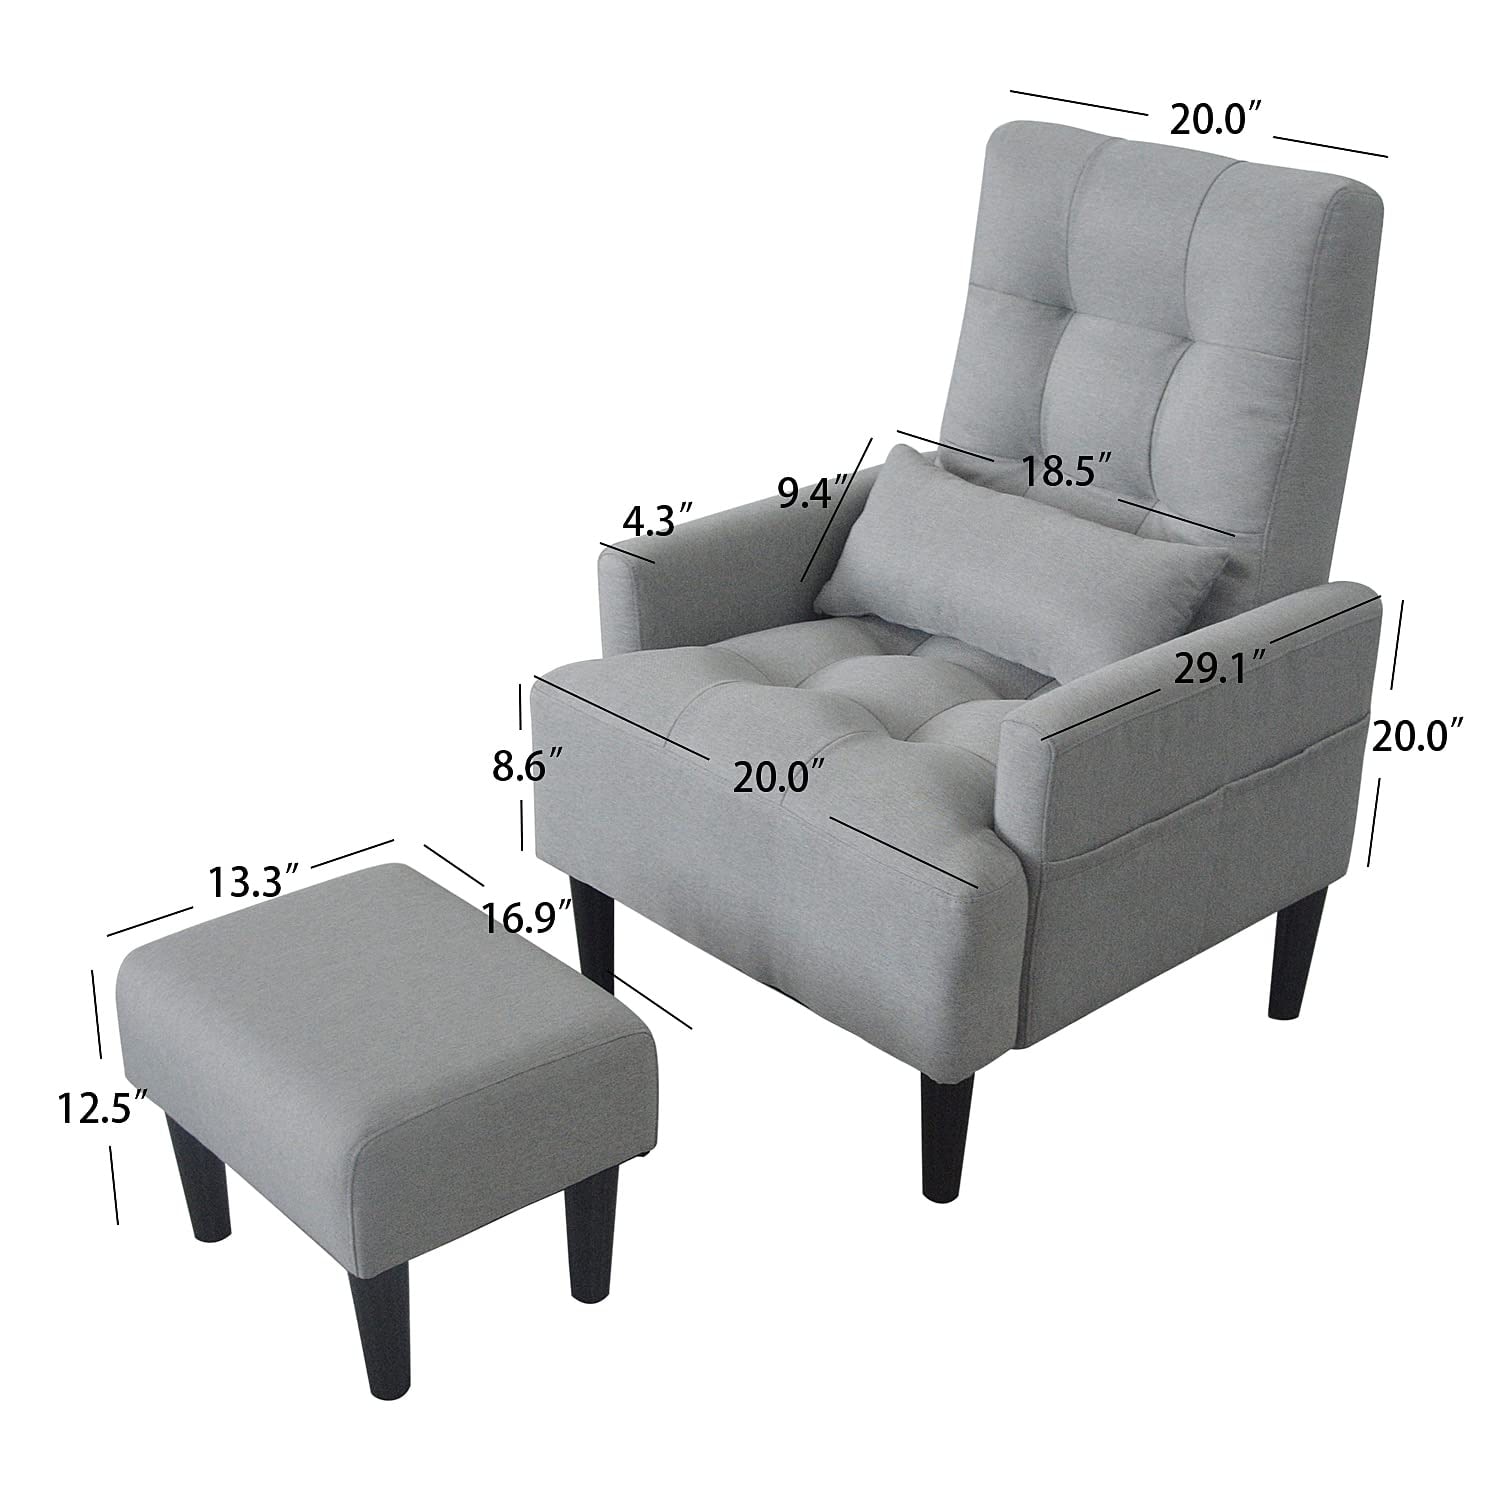 https://ak1.ostkcdn.com/images/products/is/images/direct/73c46e9f6102e2fd600129e7ff0b0d247653b7dc/Recliner-Chair-with-Ottoman%2C-Lumbar-Pillow-and-Side-Pocket.jpg